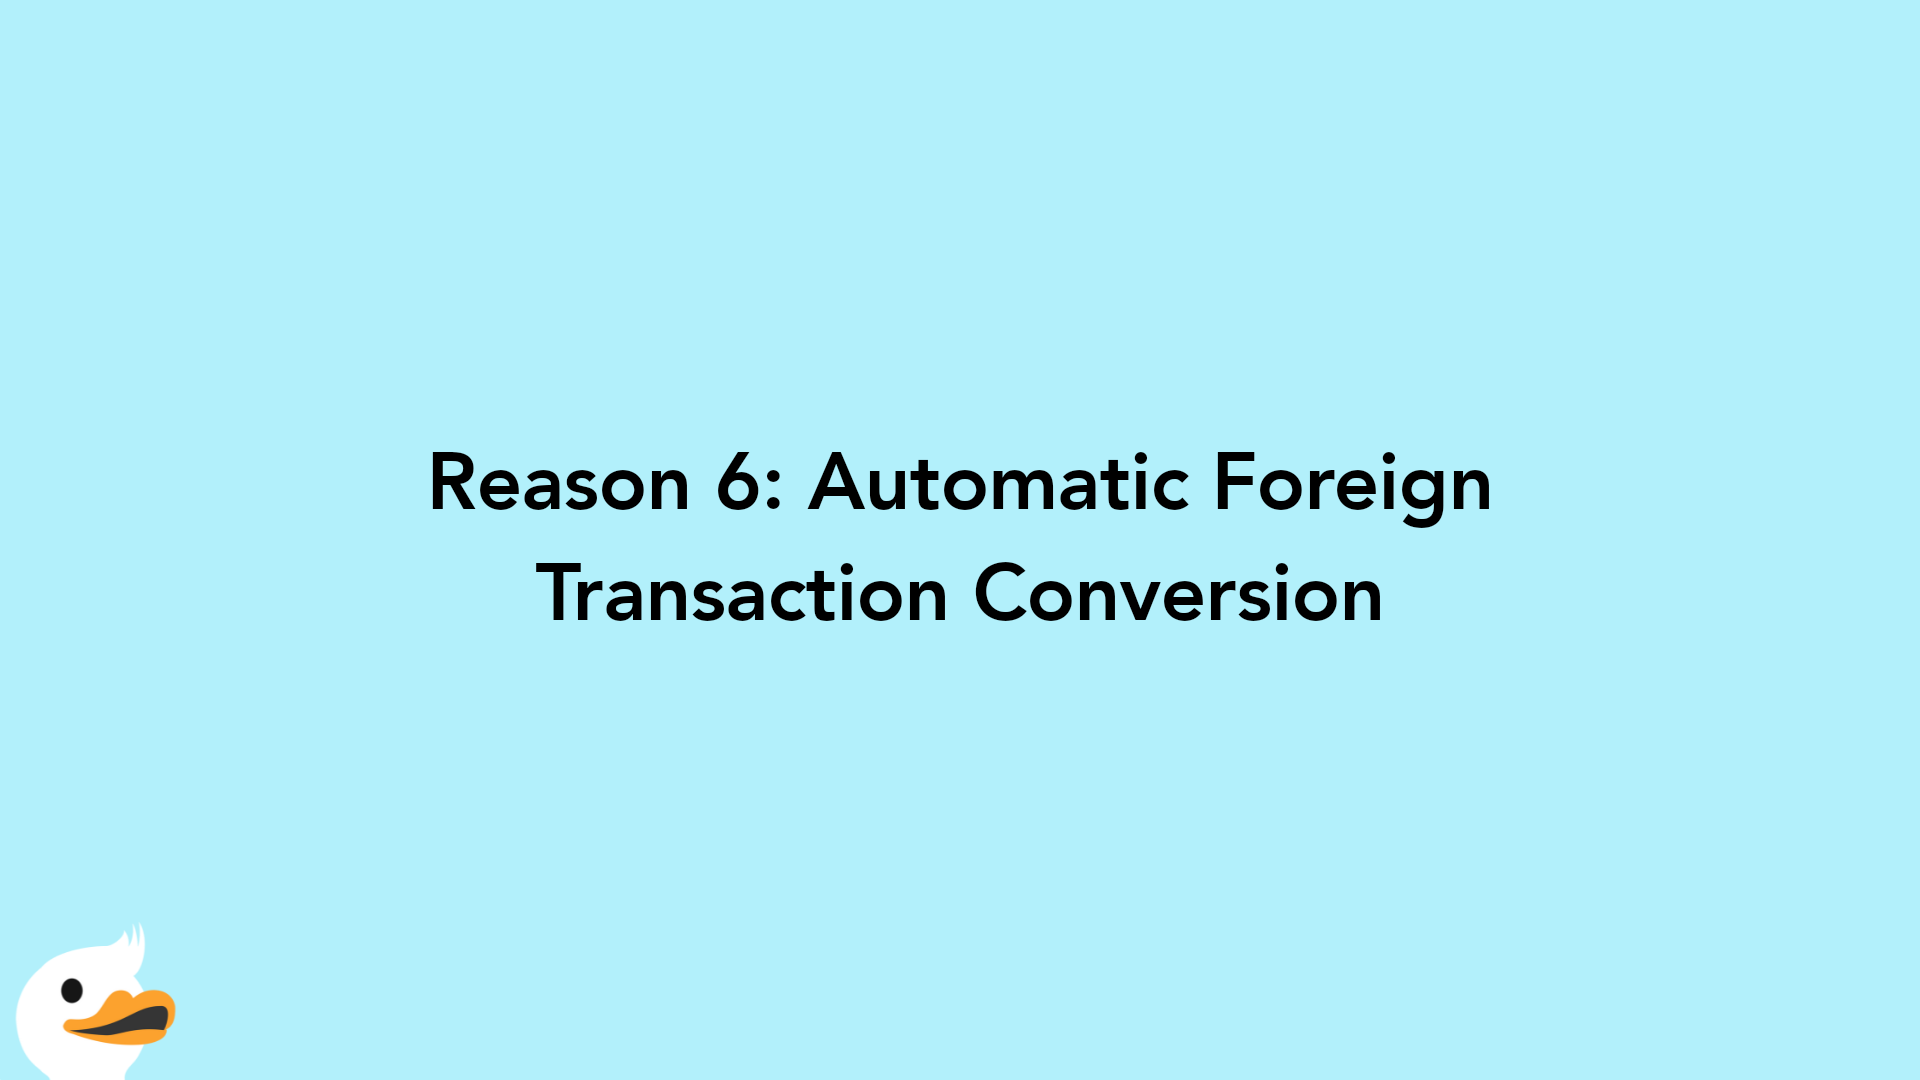 Reason 6: Automatic Foreign Transaction Conversion